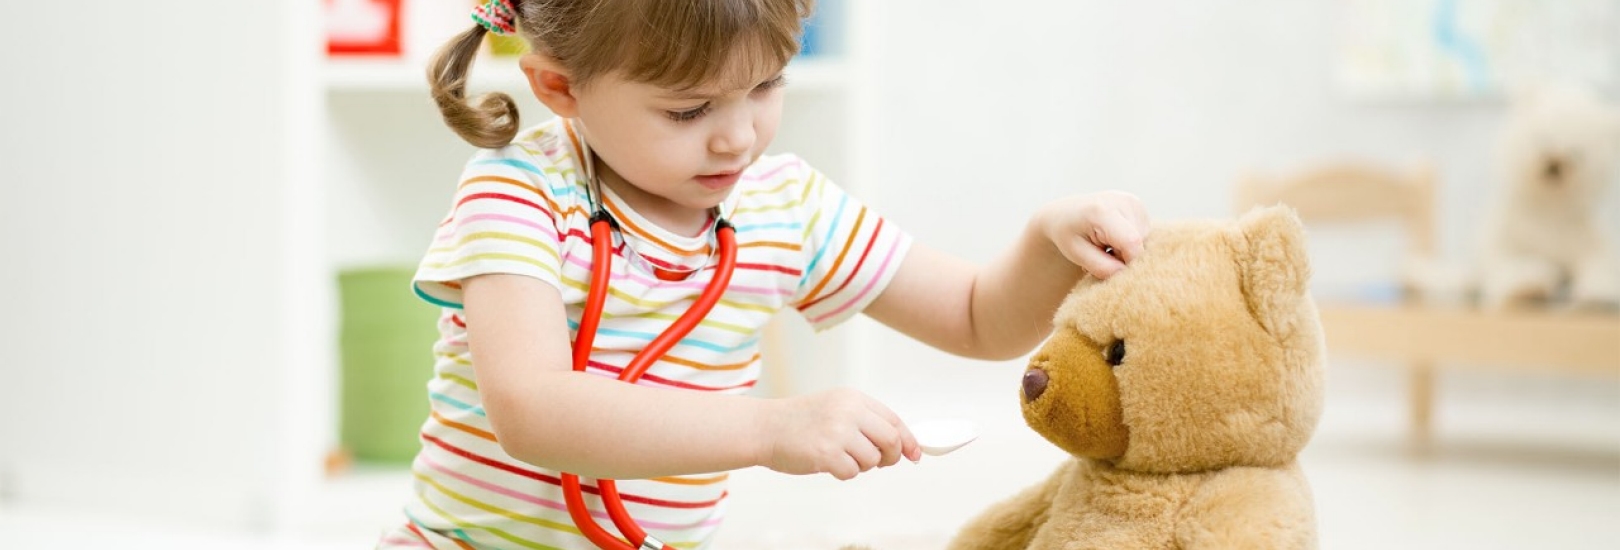 child girl playing doctor and curing plush toy